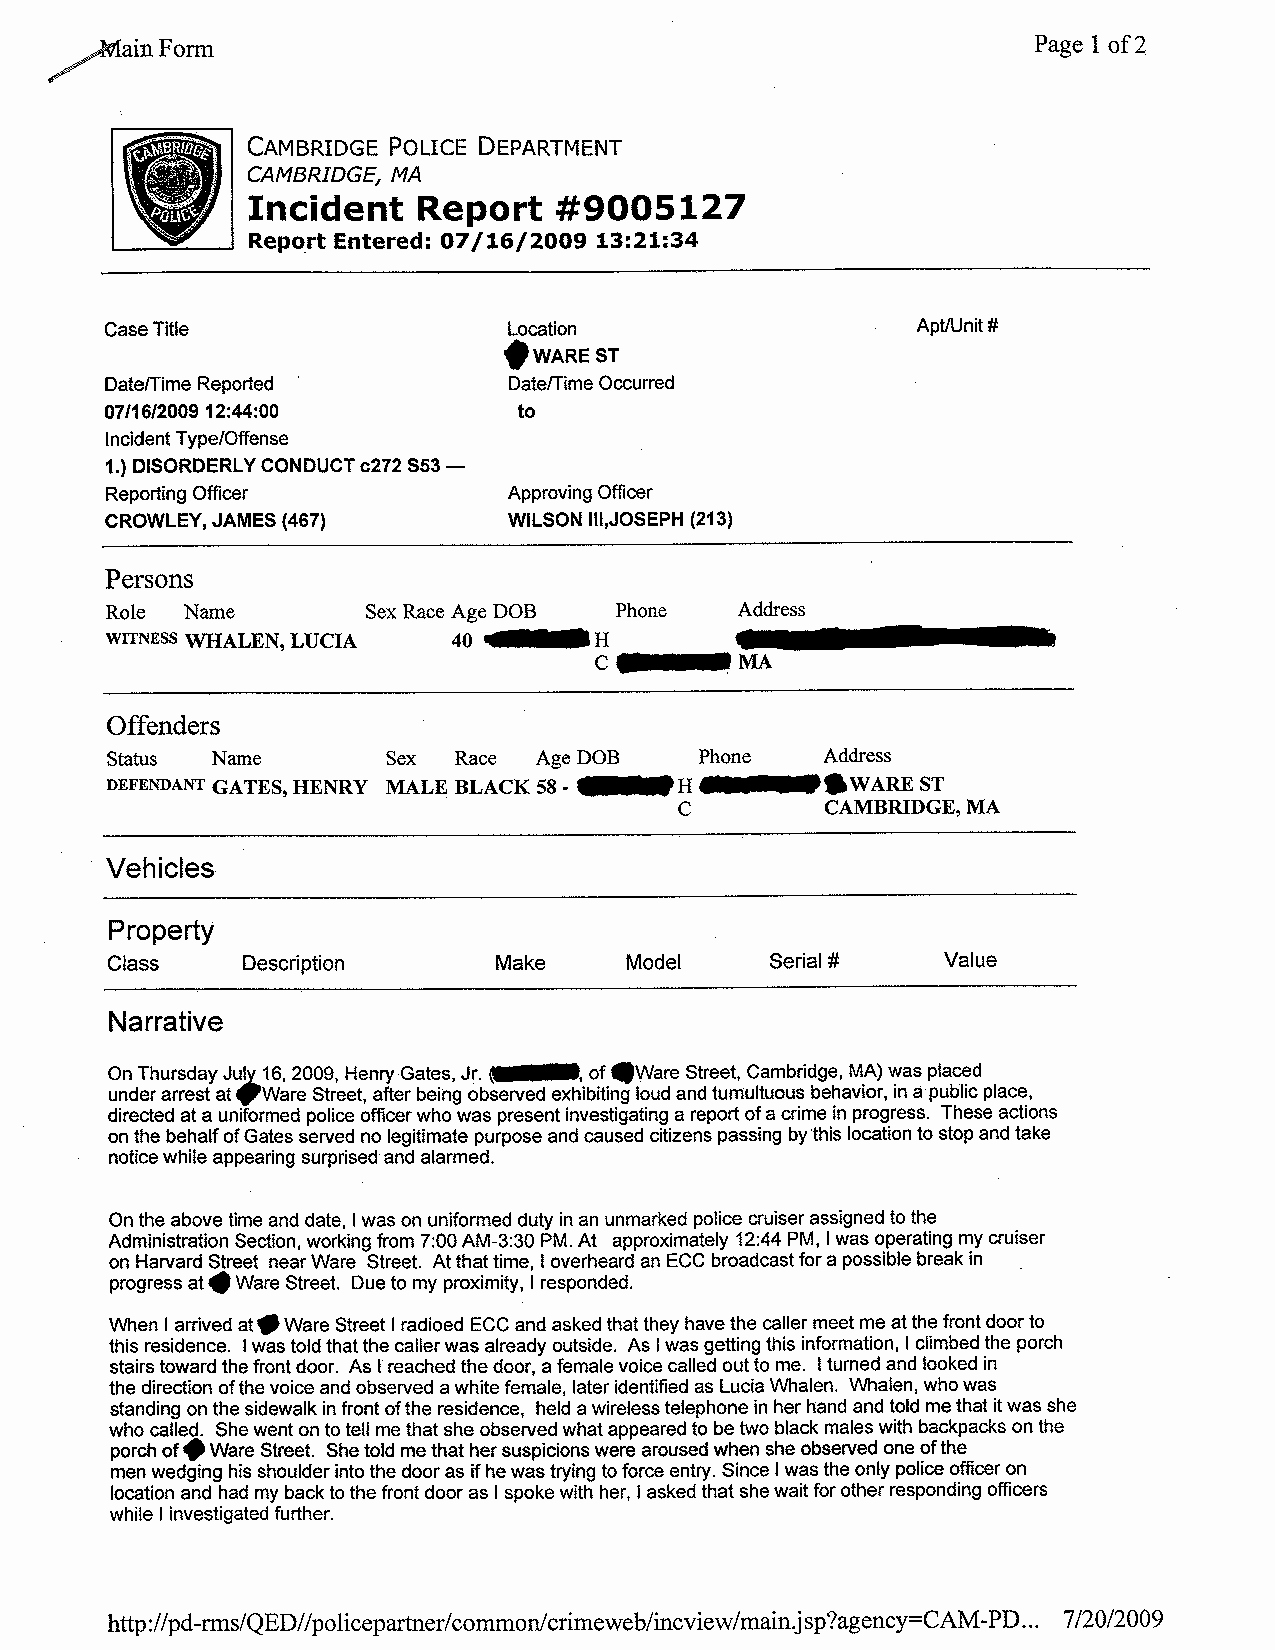 Police Arrest Report Template New Police Report Template Free Printable Documents